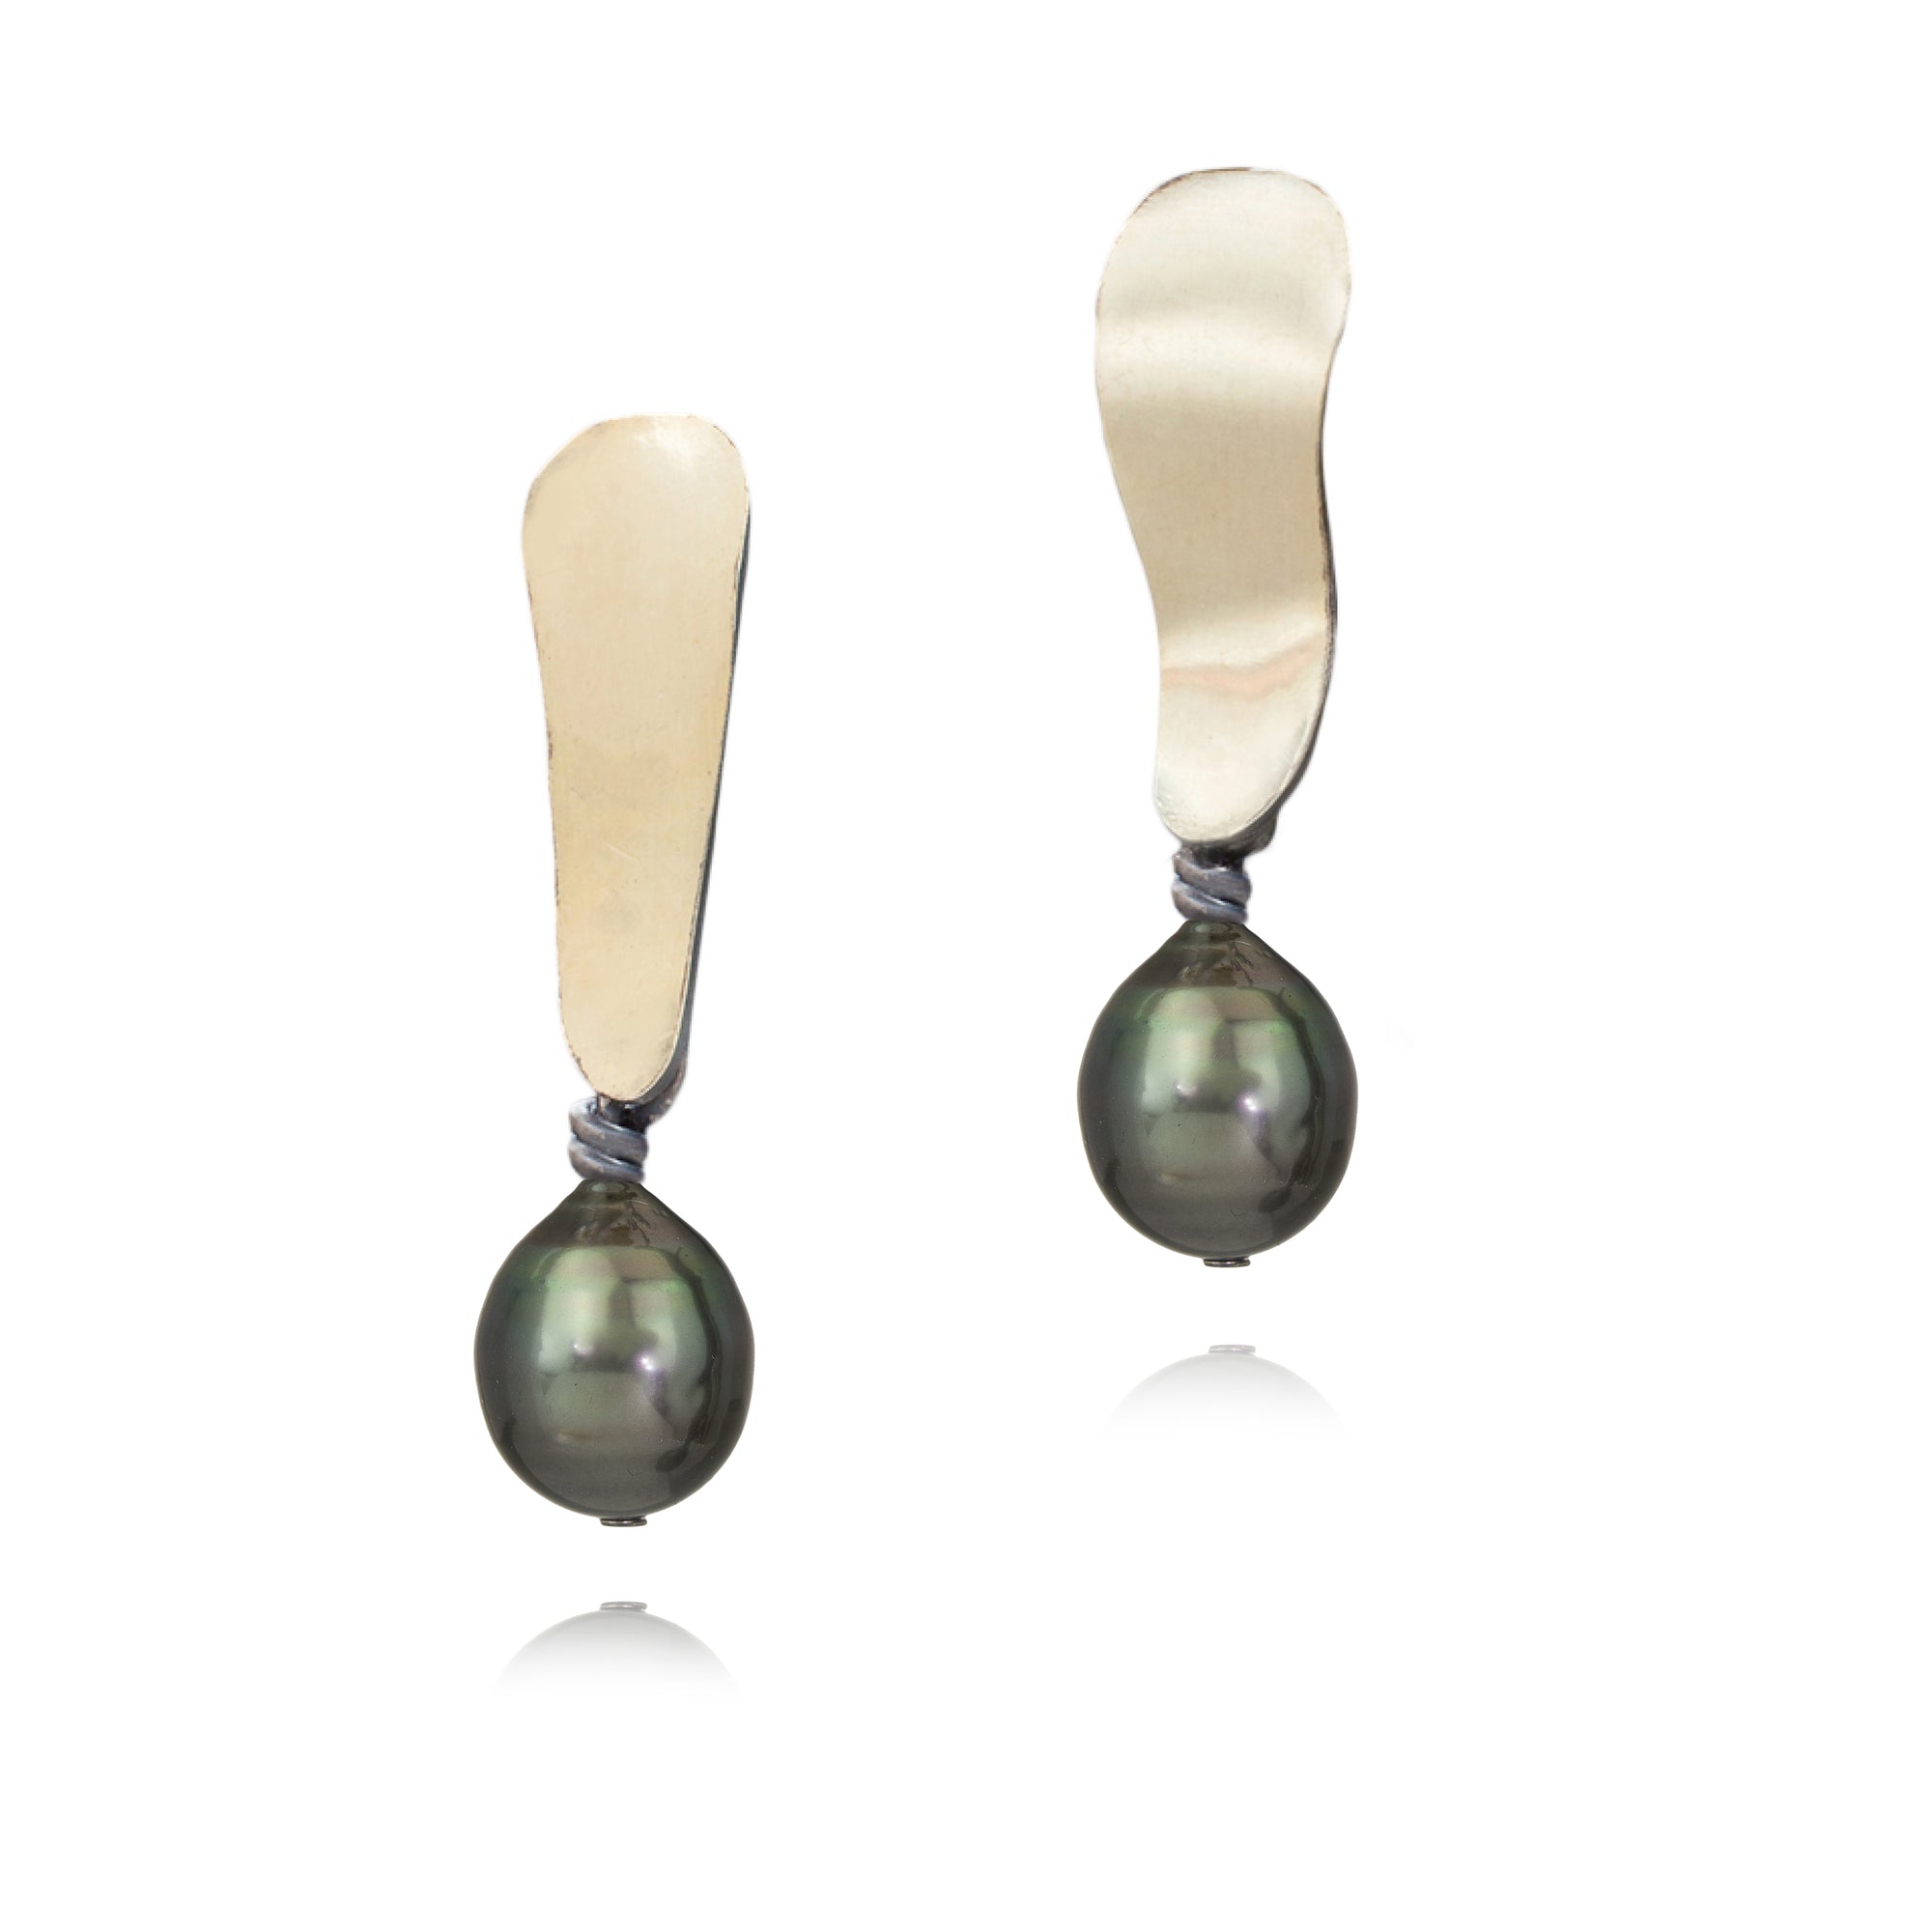 Suzanne Schwartz Jewelry 22k Short Pearl Hanging Earrings with Tahitian Pearls